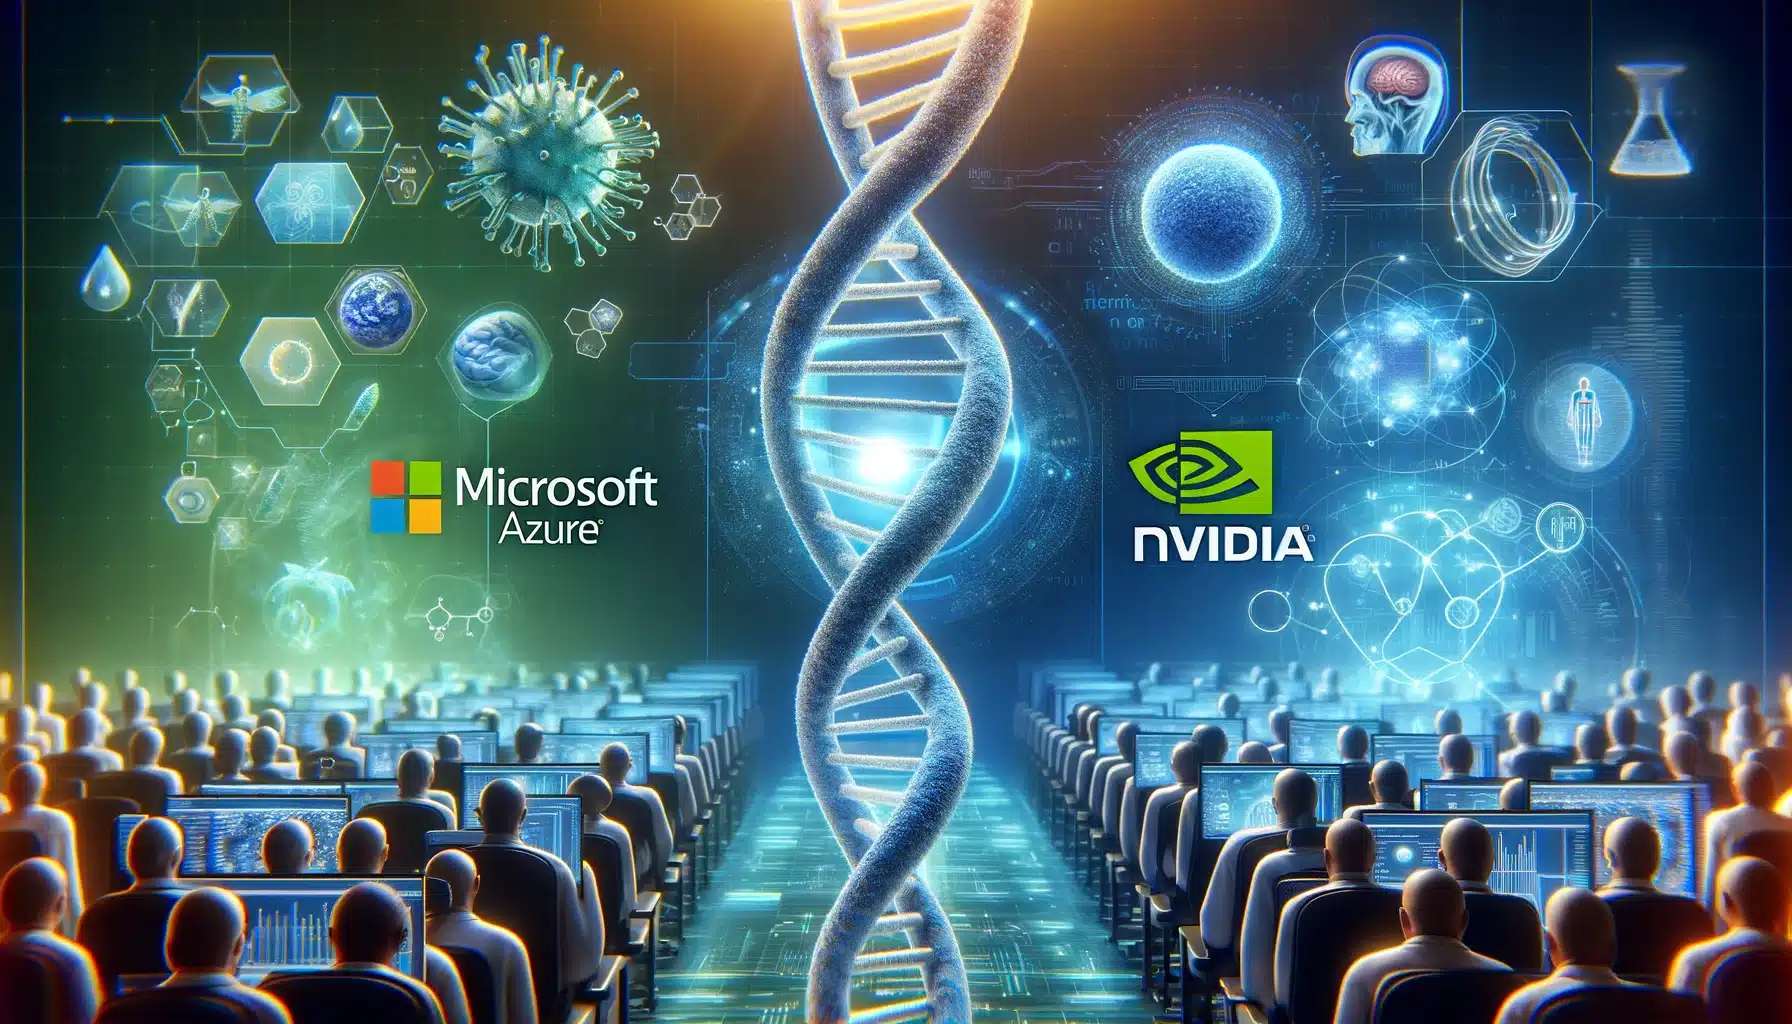 Microsoft and NVIDIA partner to accelerate healthcare innovation with generative AI and cloud computing